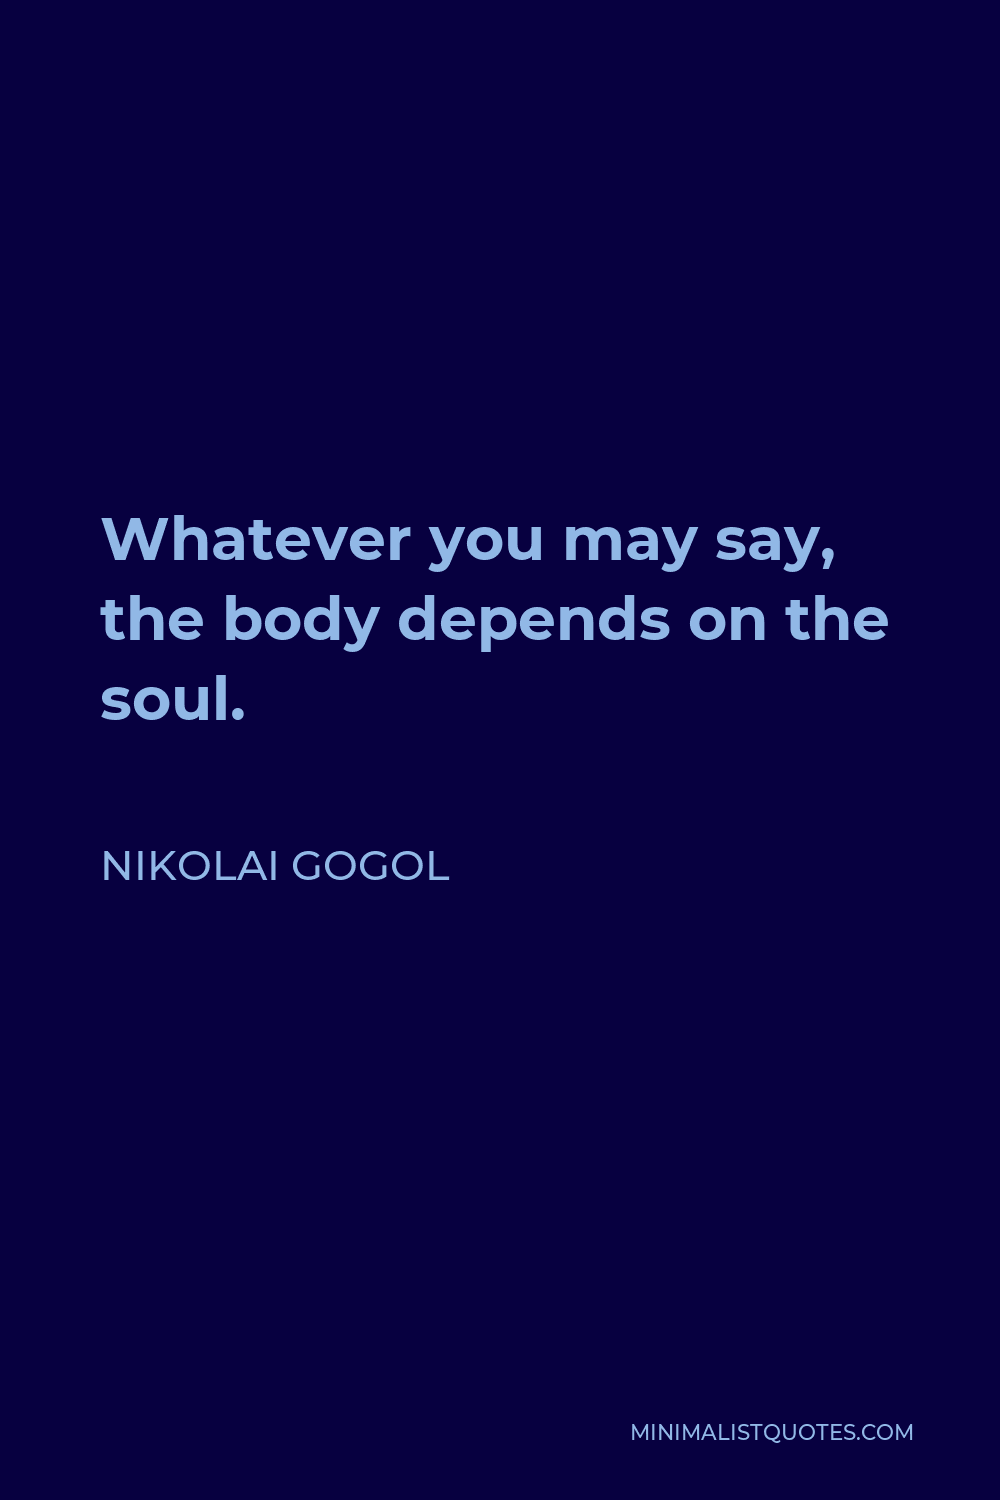 Nikolai Gogol Quote - Whatever you may say, the body depends on the soul.